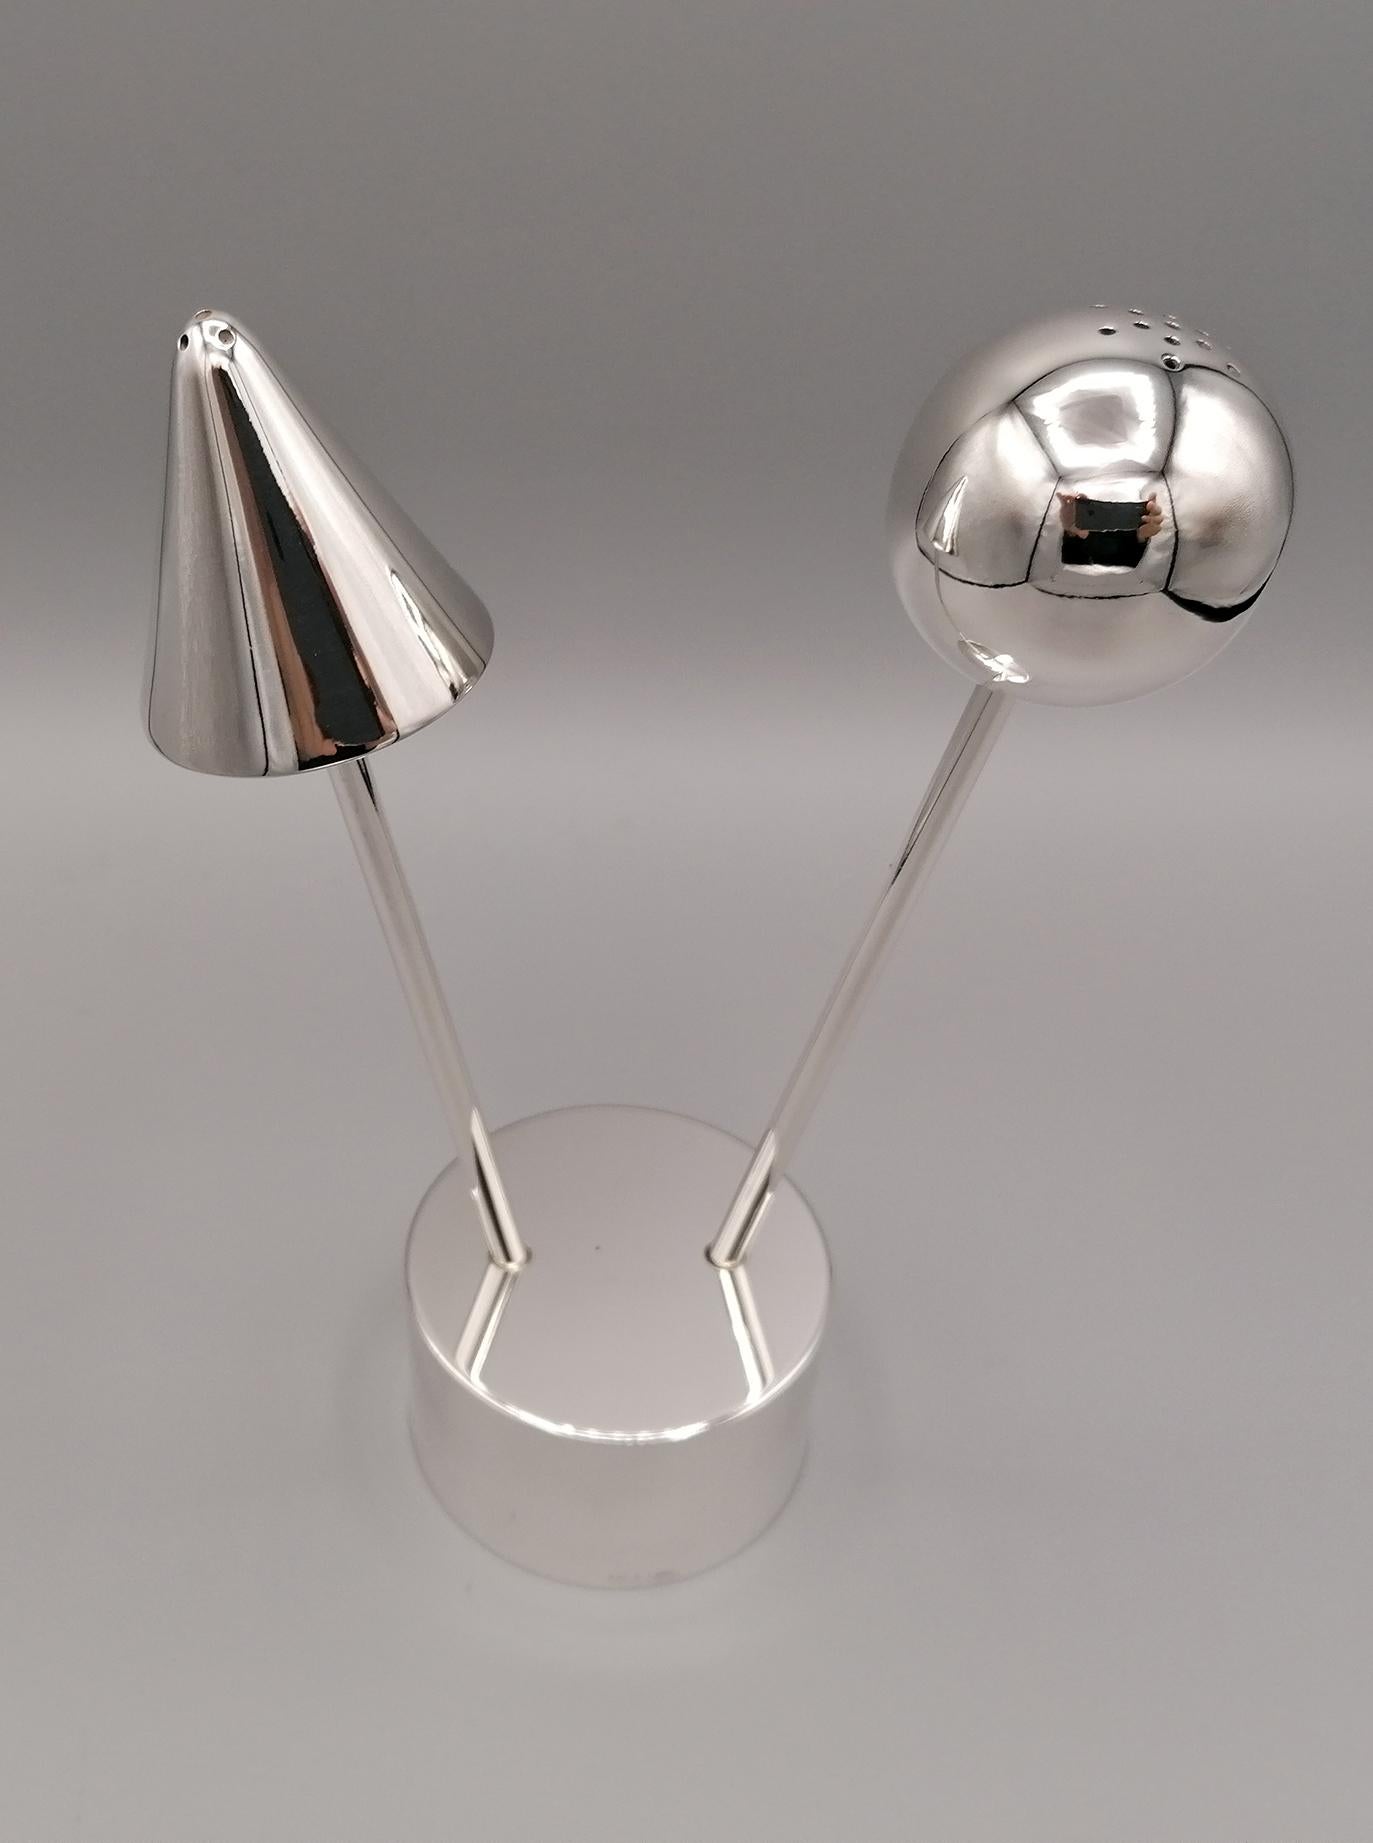 800 silver solid silver salt and pepper set of modern design. Created to be not only a useful object but also a decorative one.
The salt is a silver ball with holes for the salt to come out.
The pepper is conical with small holes for the pepper to